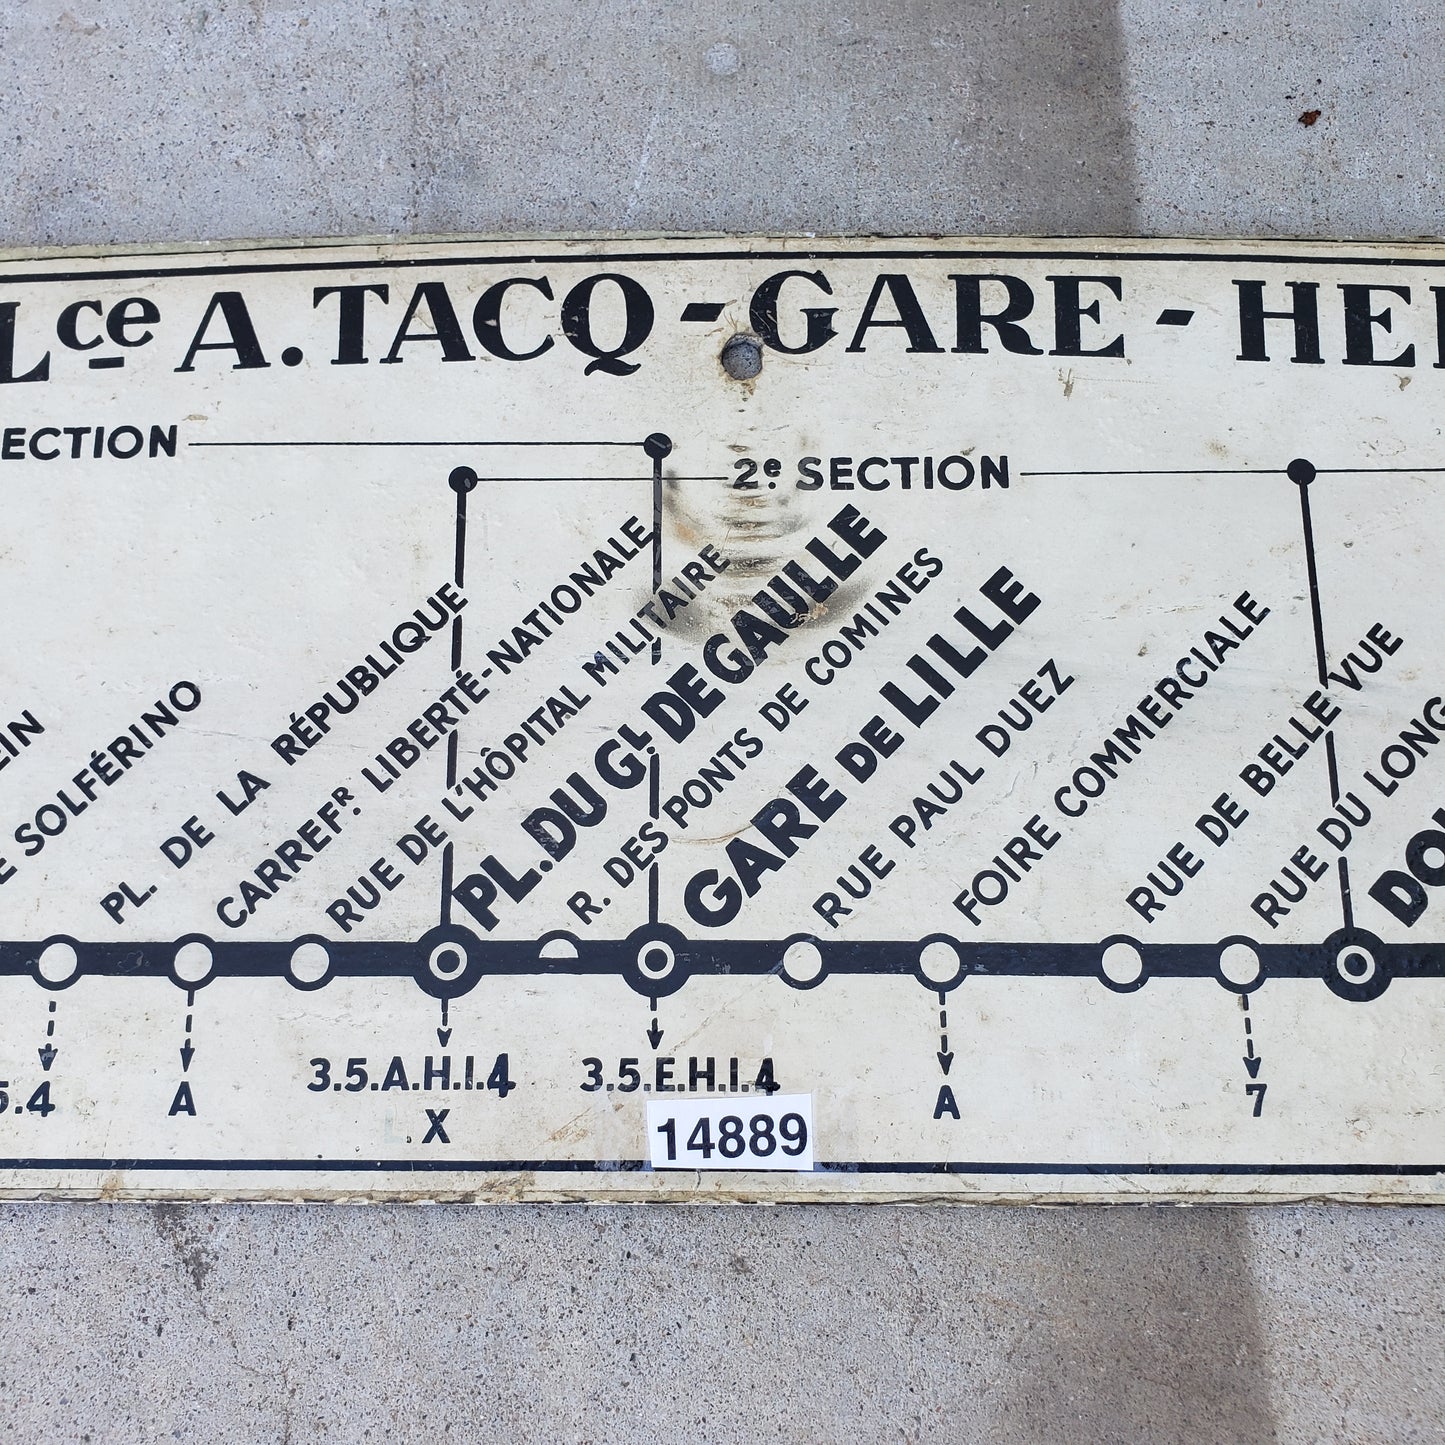 Double Sided French Metal Metro Station Sign - PLce a Taco Gare - Hellemmes